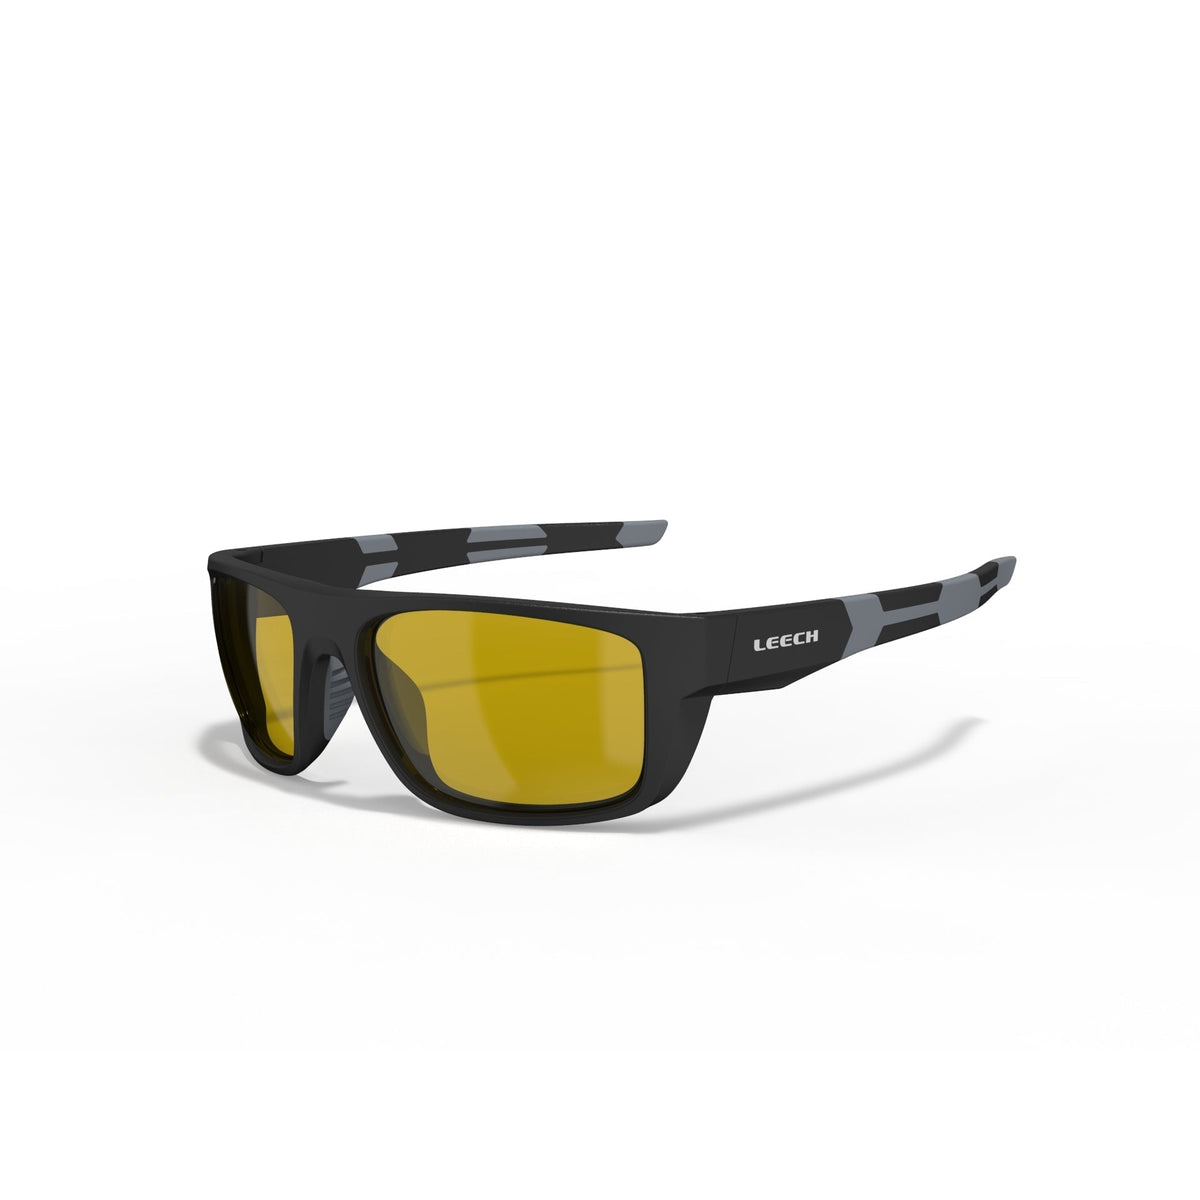 View of Sunglasses Leech Eyewear MOONSTONE Polarized Fishing Sunglasses Moonstone Yellow - Yellow Lens available at EZOKO Pike and Musky Shop